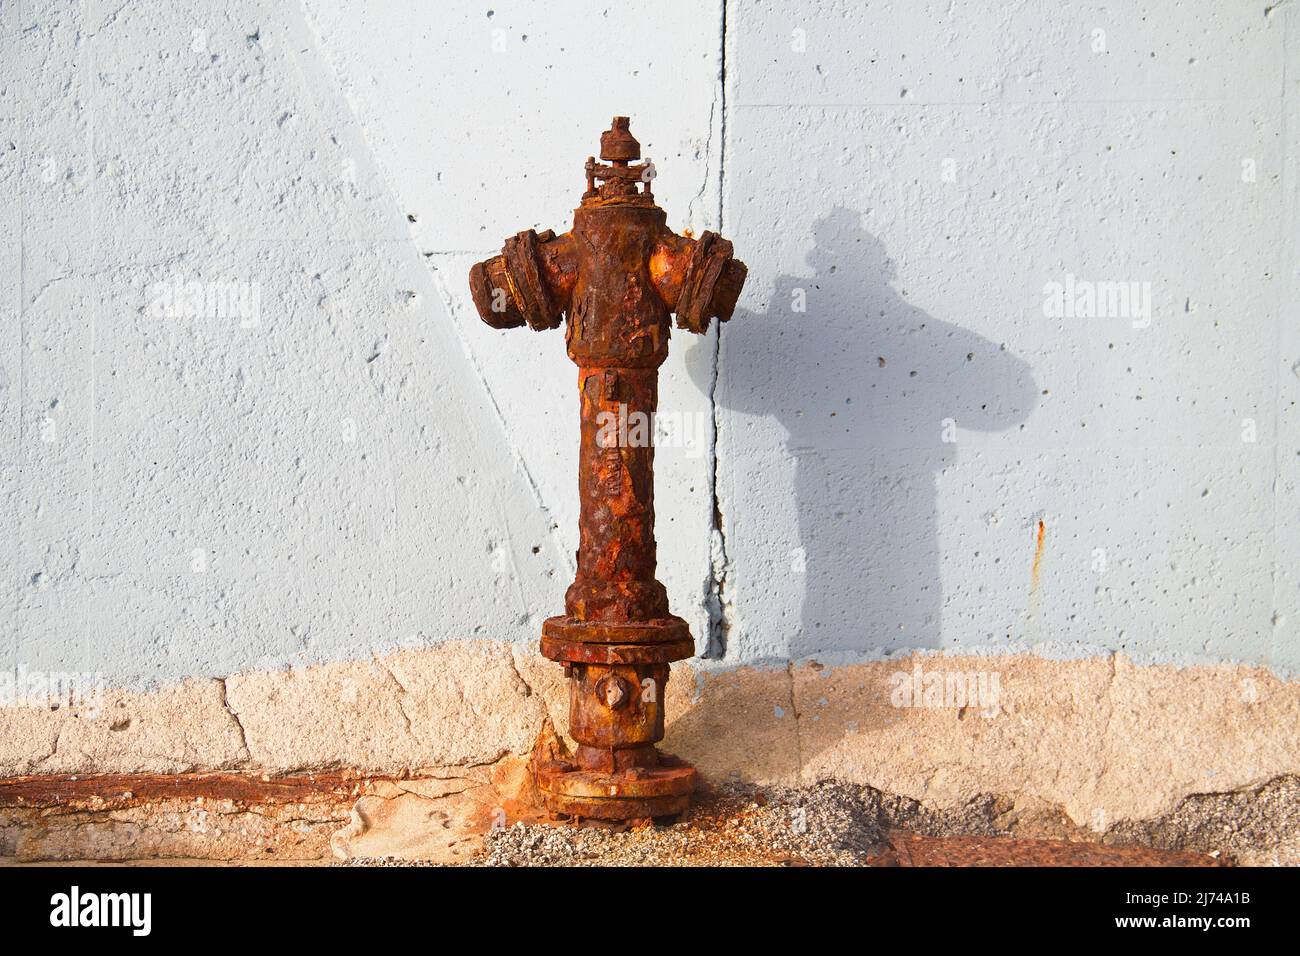 Old and very rusty fire hydrant, deferred maintenance Stock Photo